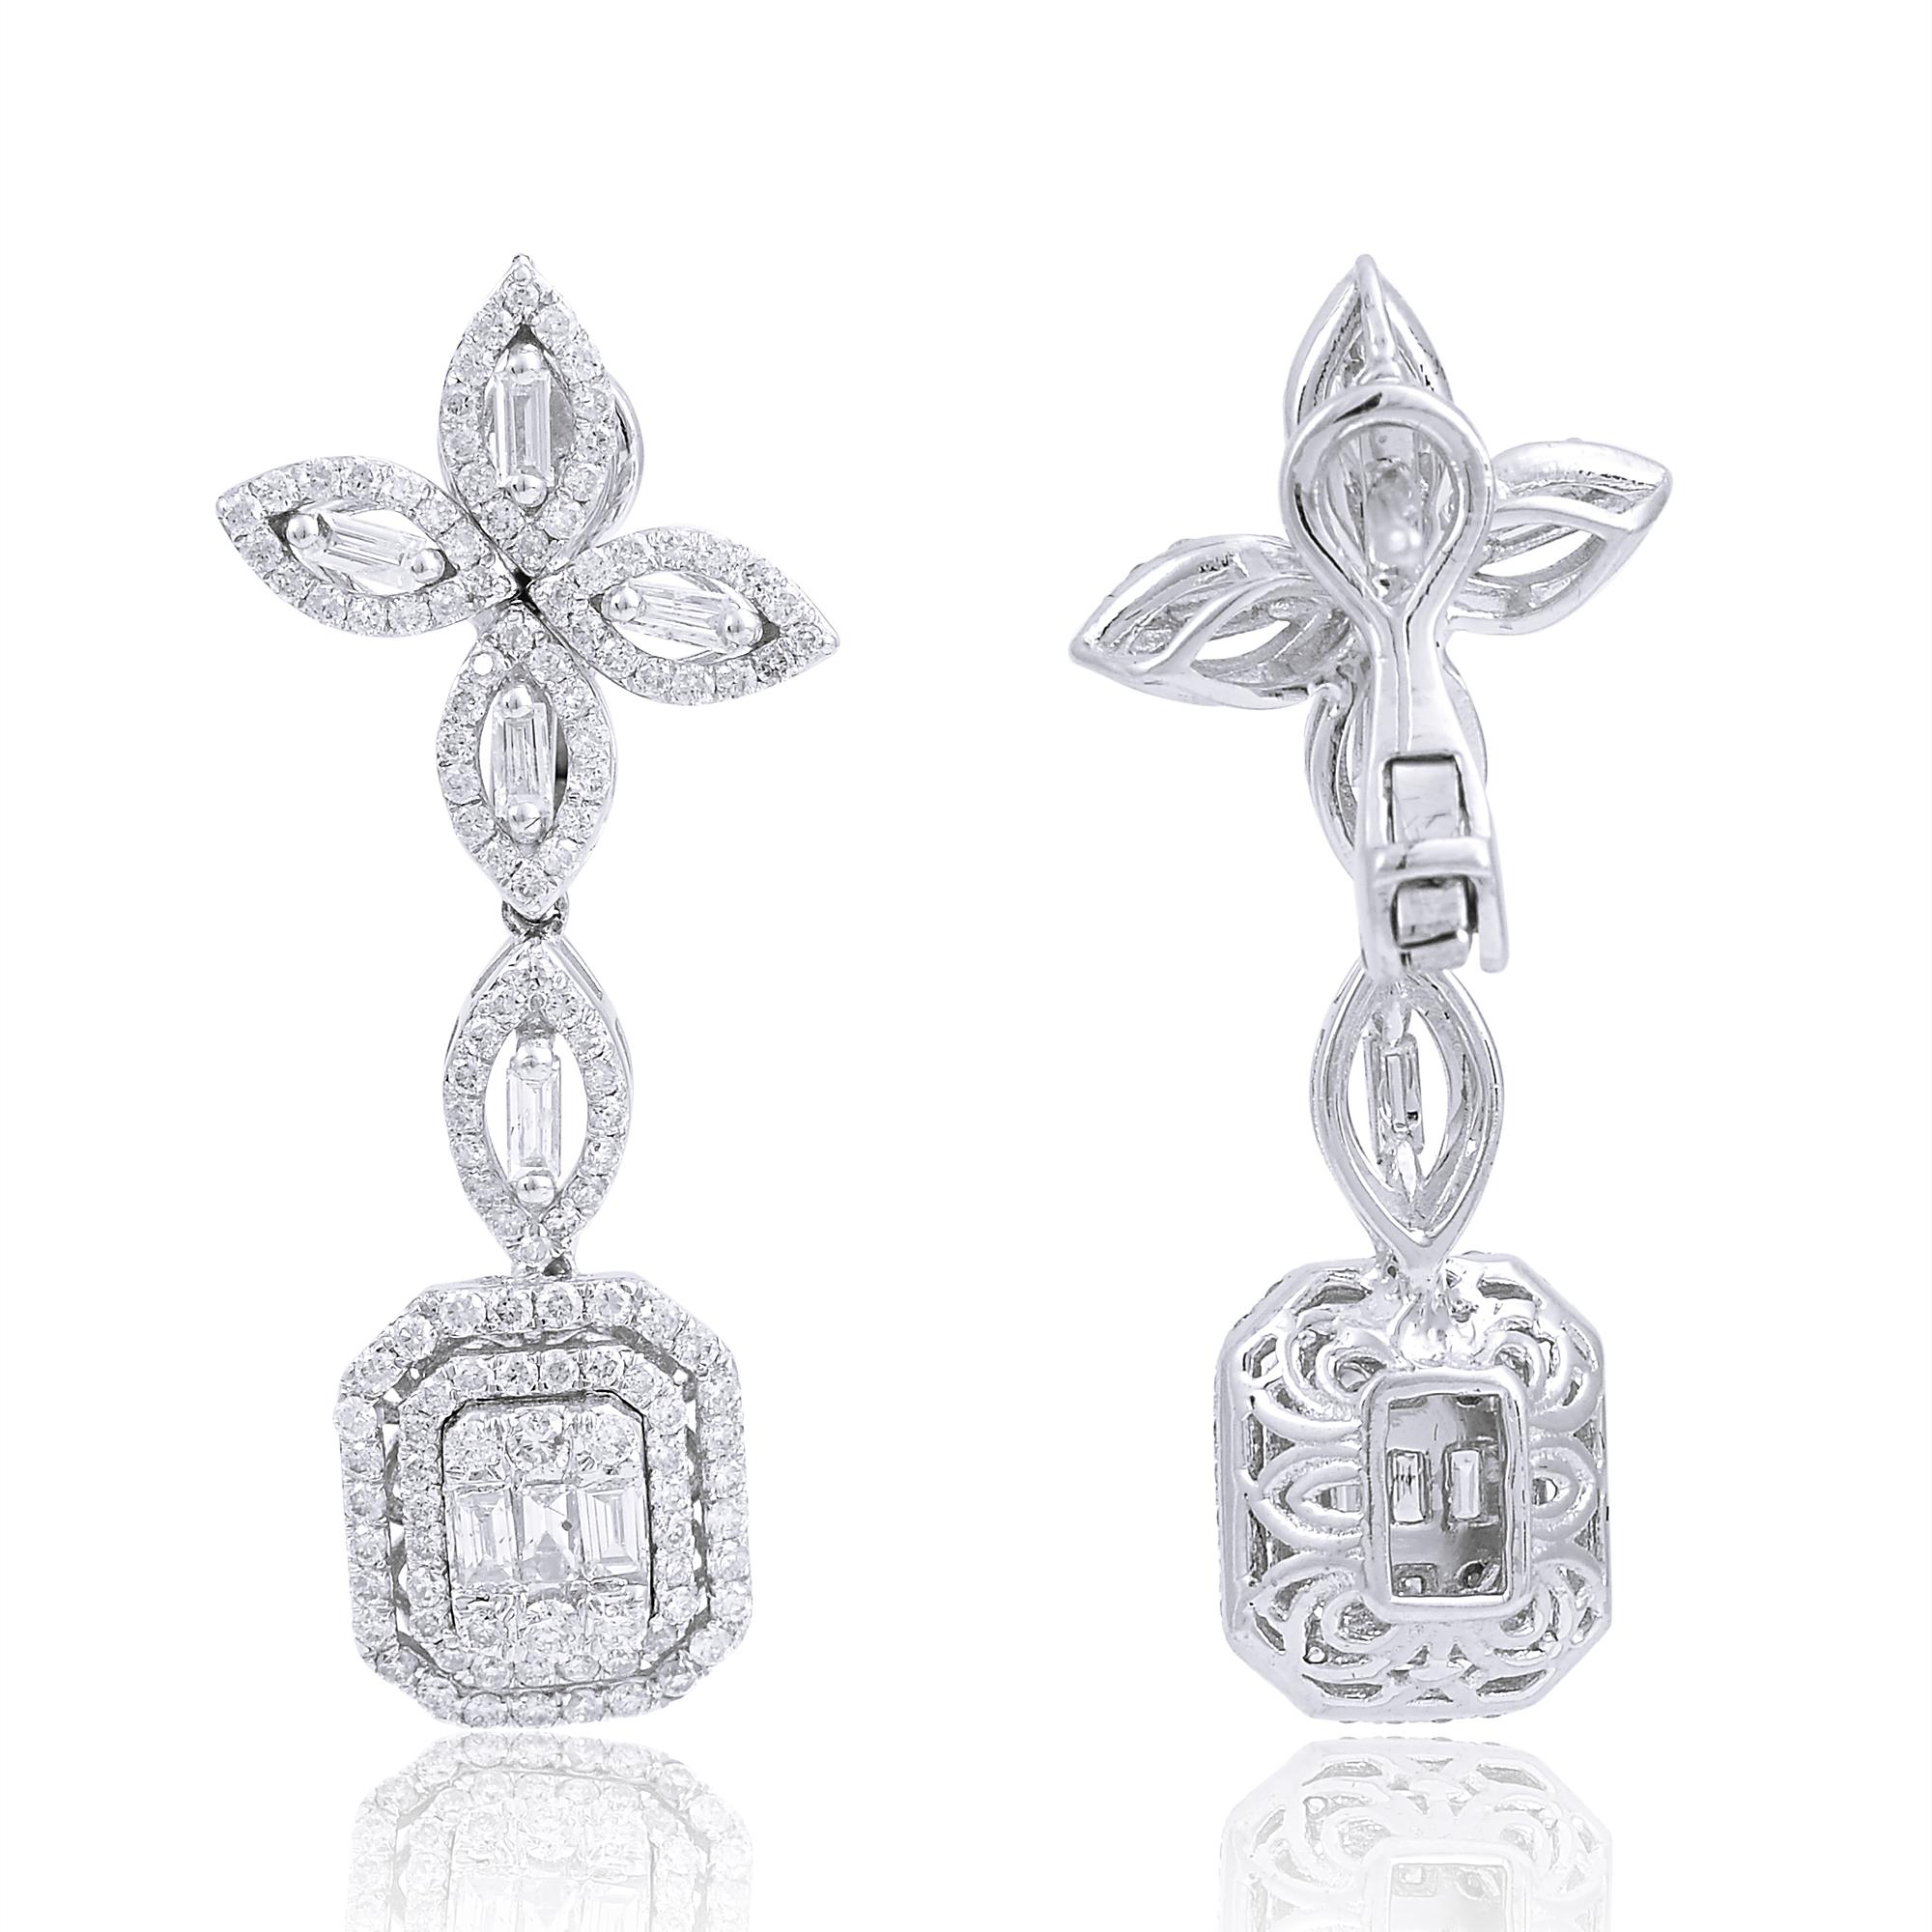 Item Code :- CN-19048
Gross Wt. :- 9.23 gm
18k White Gold Wt. :- 8.83 gm
Natural Diamond Wt. :- 2.00 Ct. ( AVERAGE DIAMOND CLARITY SI1-SI2 & COLOR H-I )
Earrings Size :- 34.76 x 14.20 mm approx.

✦ Sizing
.....................
We can adjust most